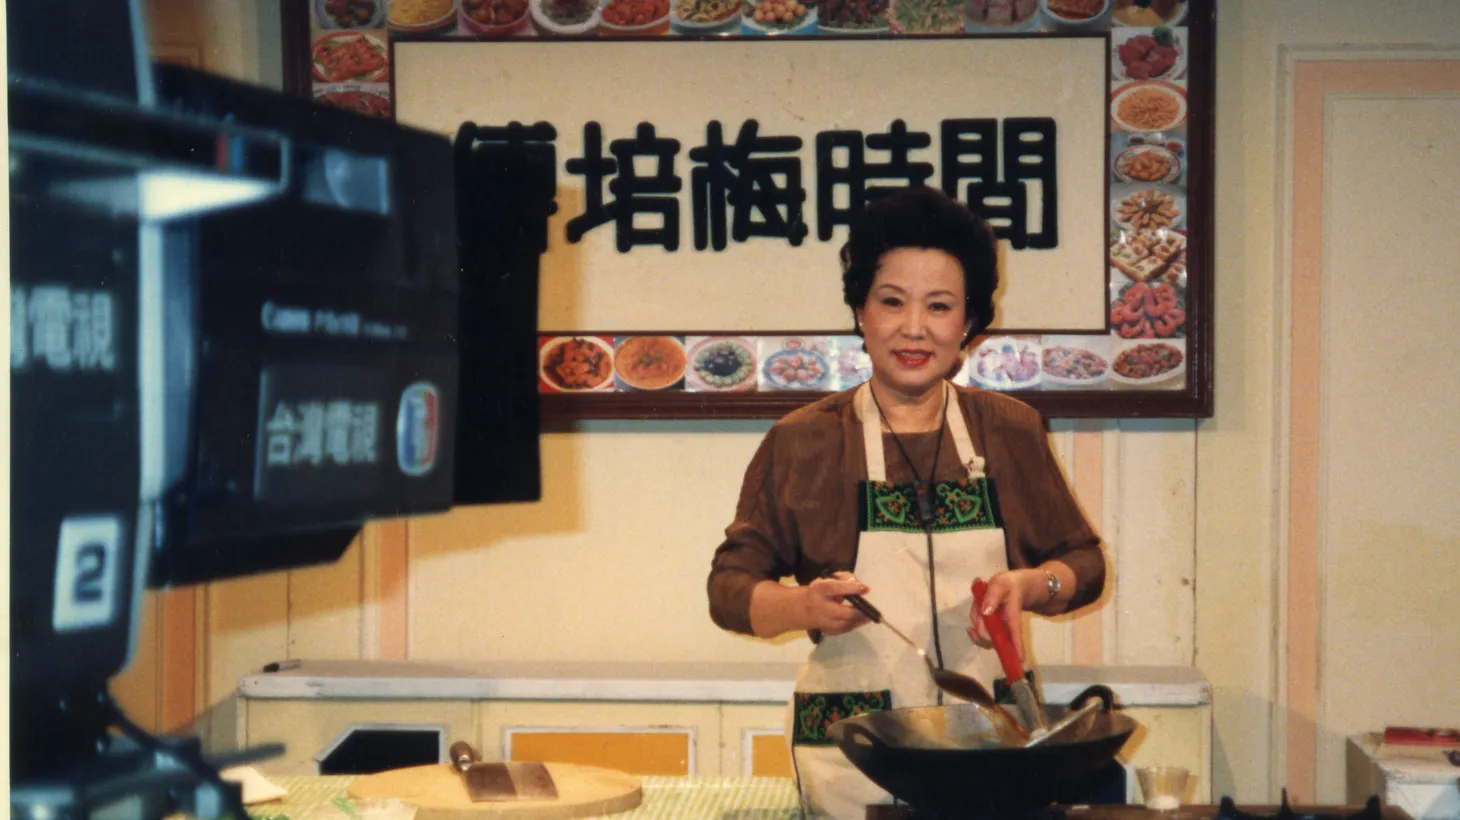 Fu Pei-mei on the set of her best-known television cooking program, “Fu Pei-mei Time'' in 1994. She taught Chinese cooking on television for more than forty years.